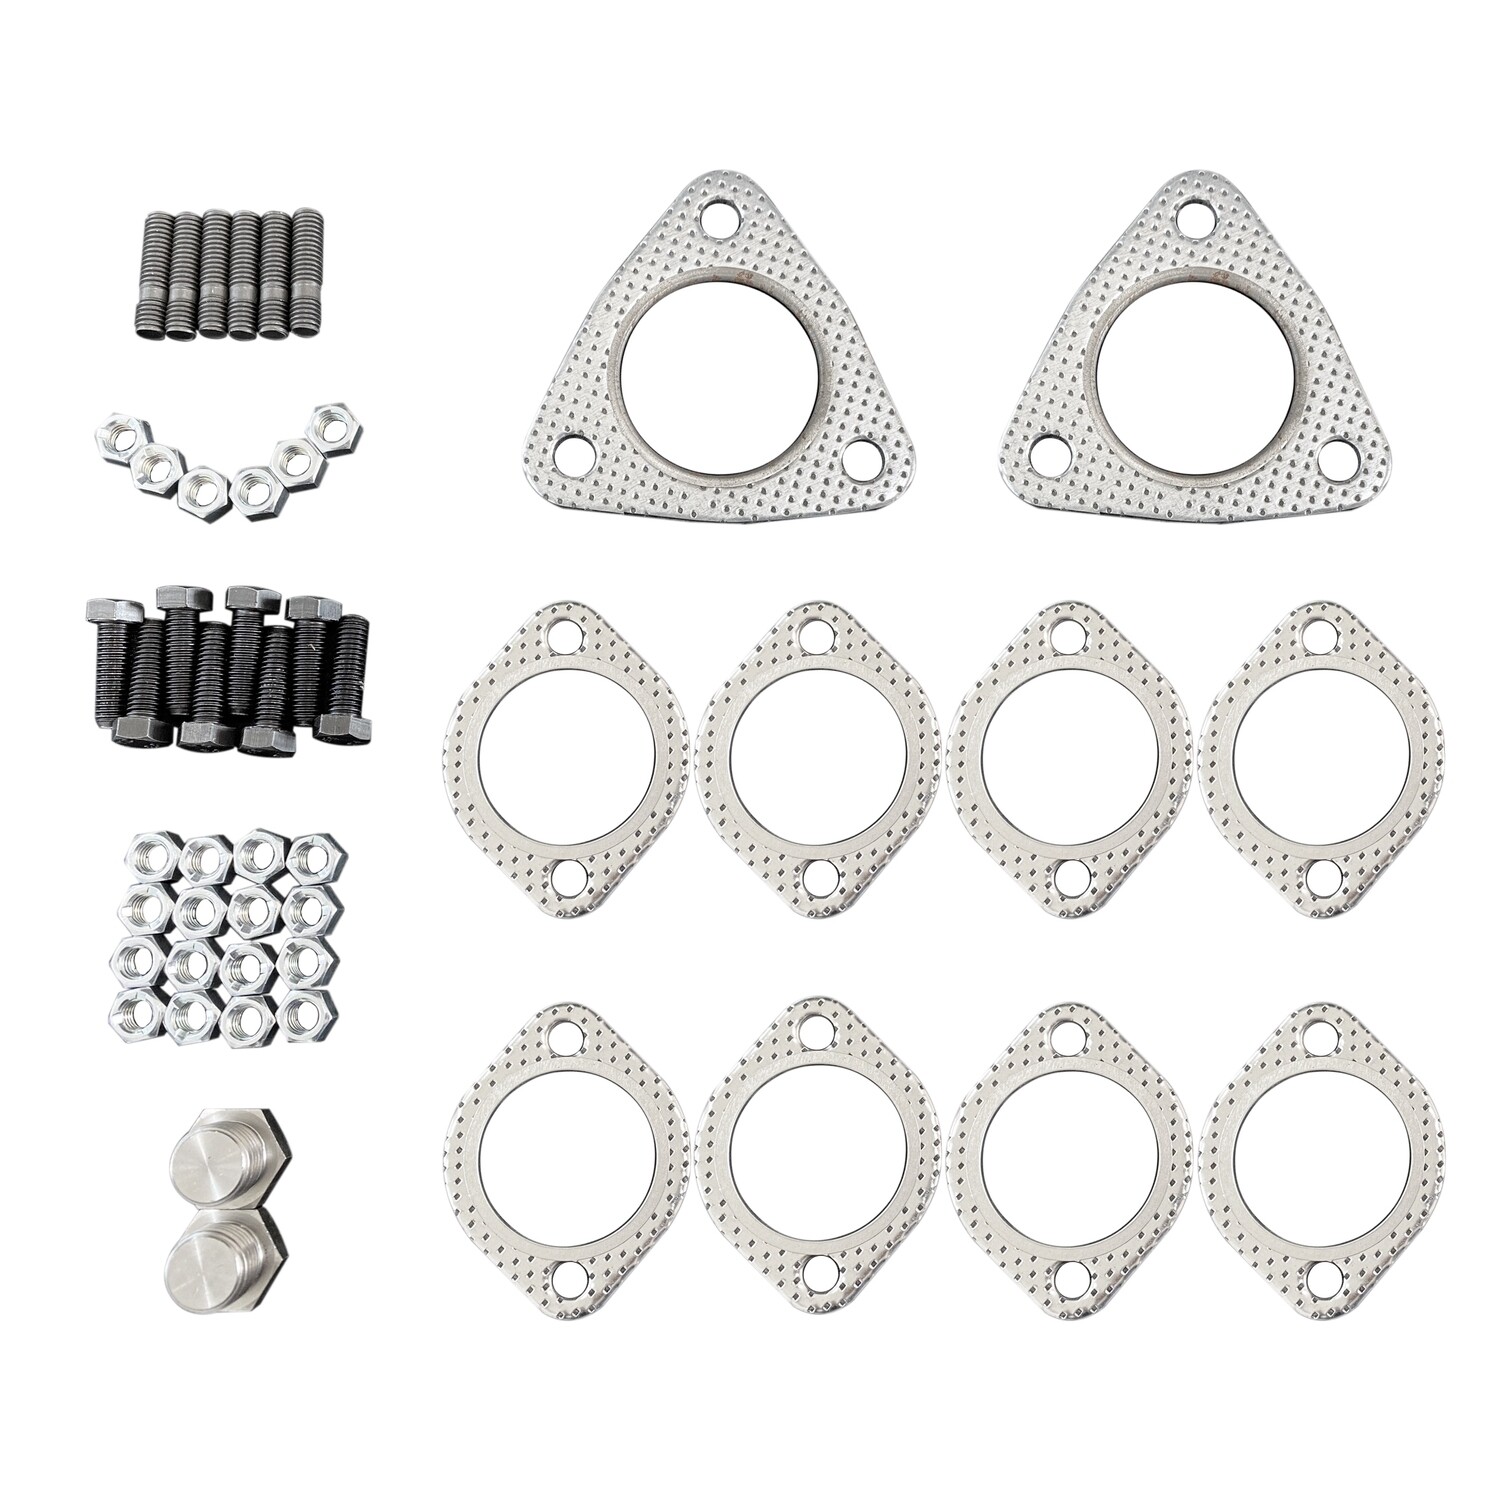 GASKET SET FOR Merge Competition 740 Exhaust system